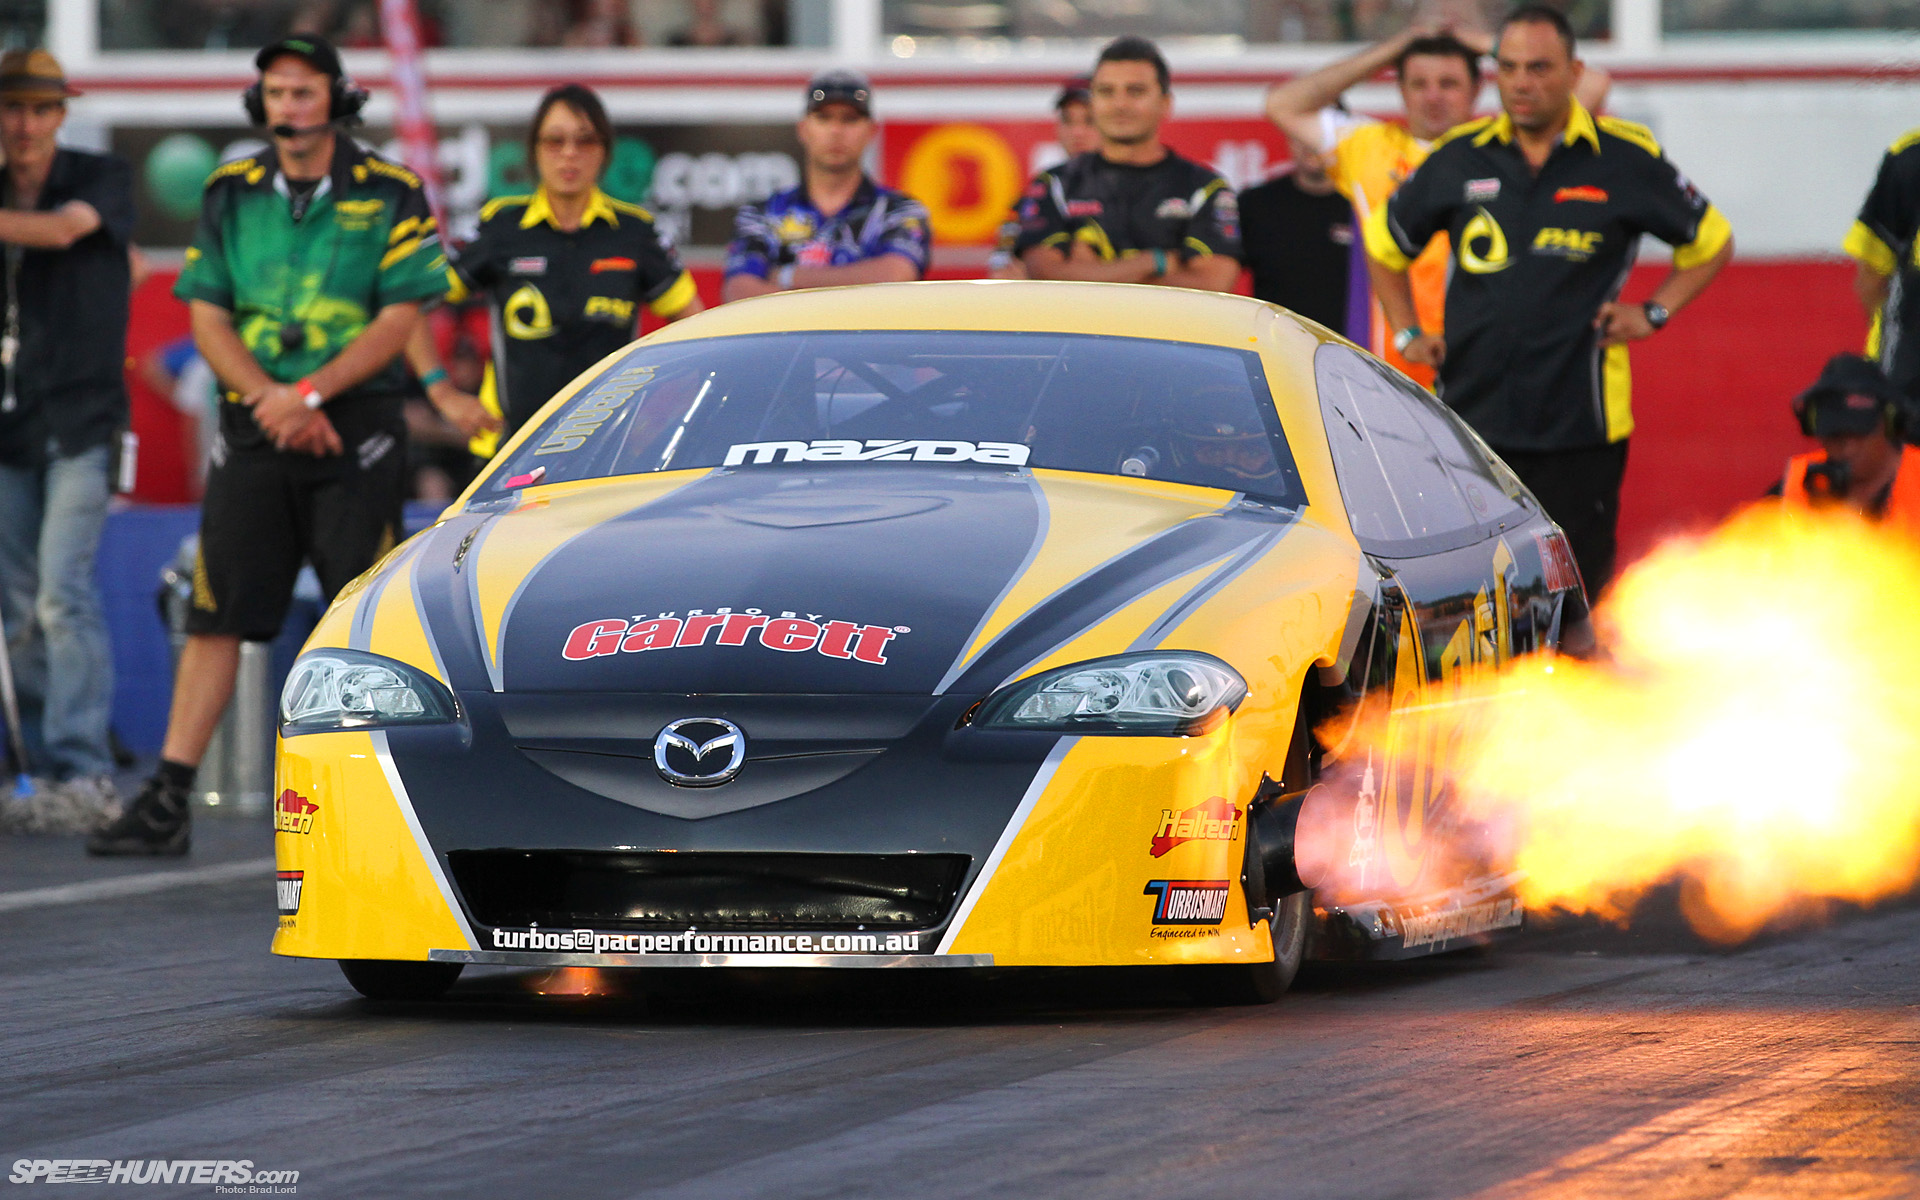 mazda, Rotary, Dt1, Drag, Racing, Hot, Rod, Fire, Race Wallpaper